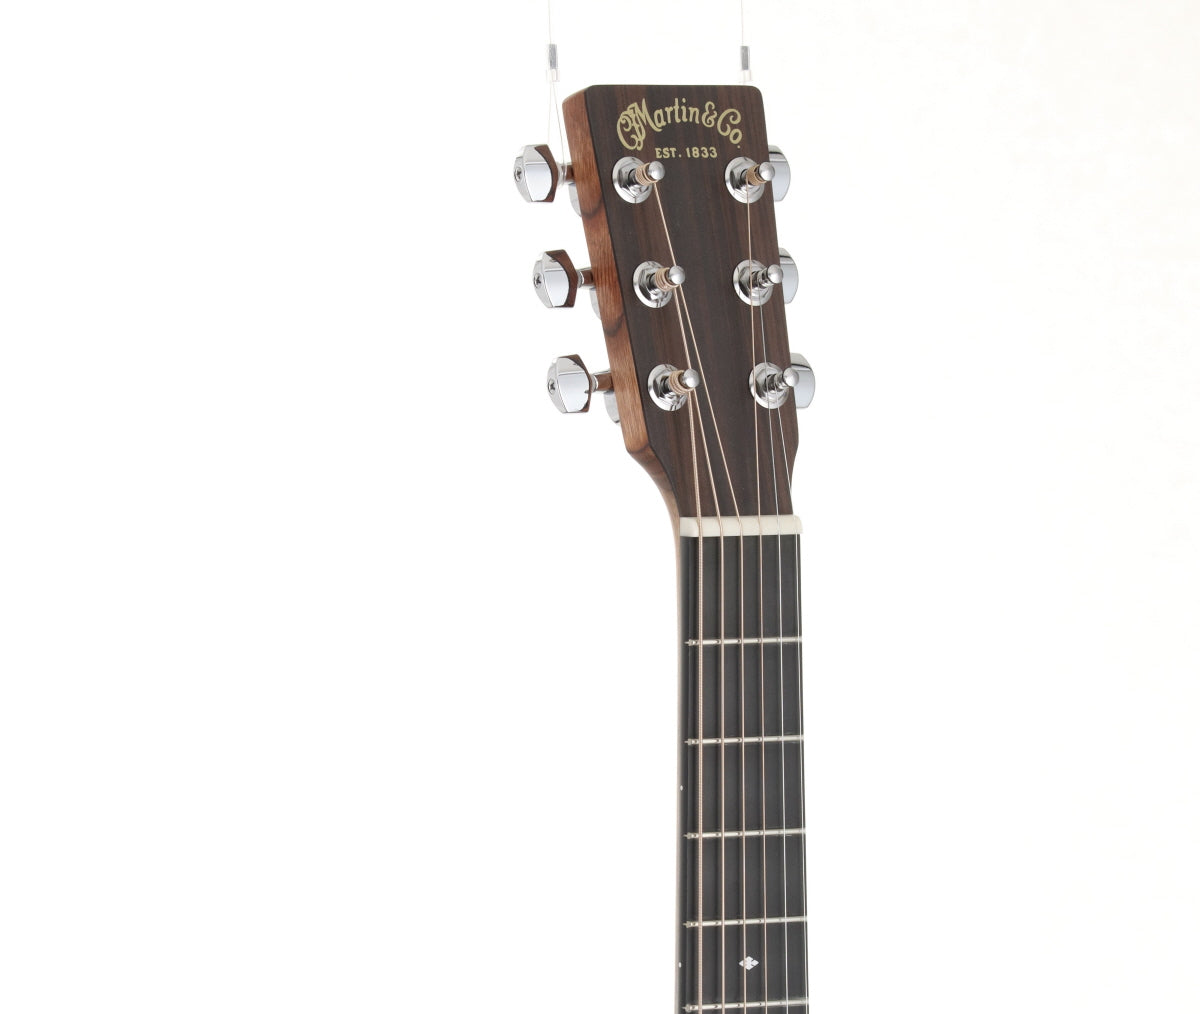 [SN 332039] USED Martin / LX Series Special - EC 2019 [06]